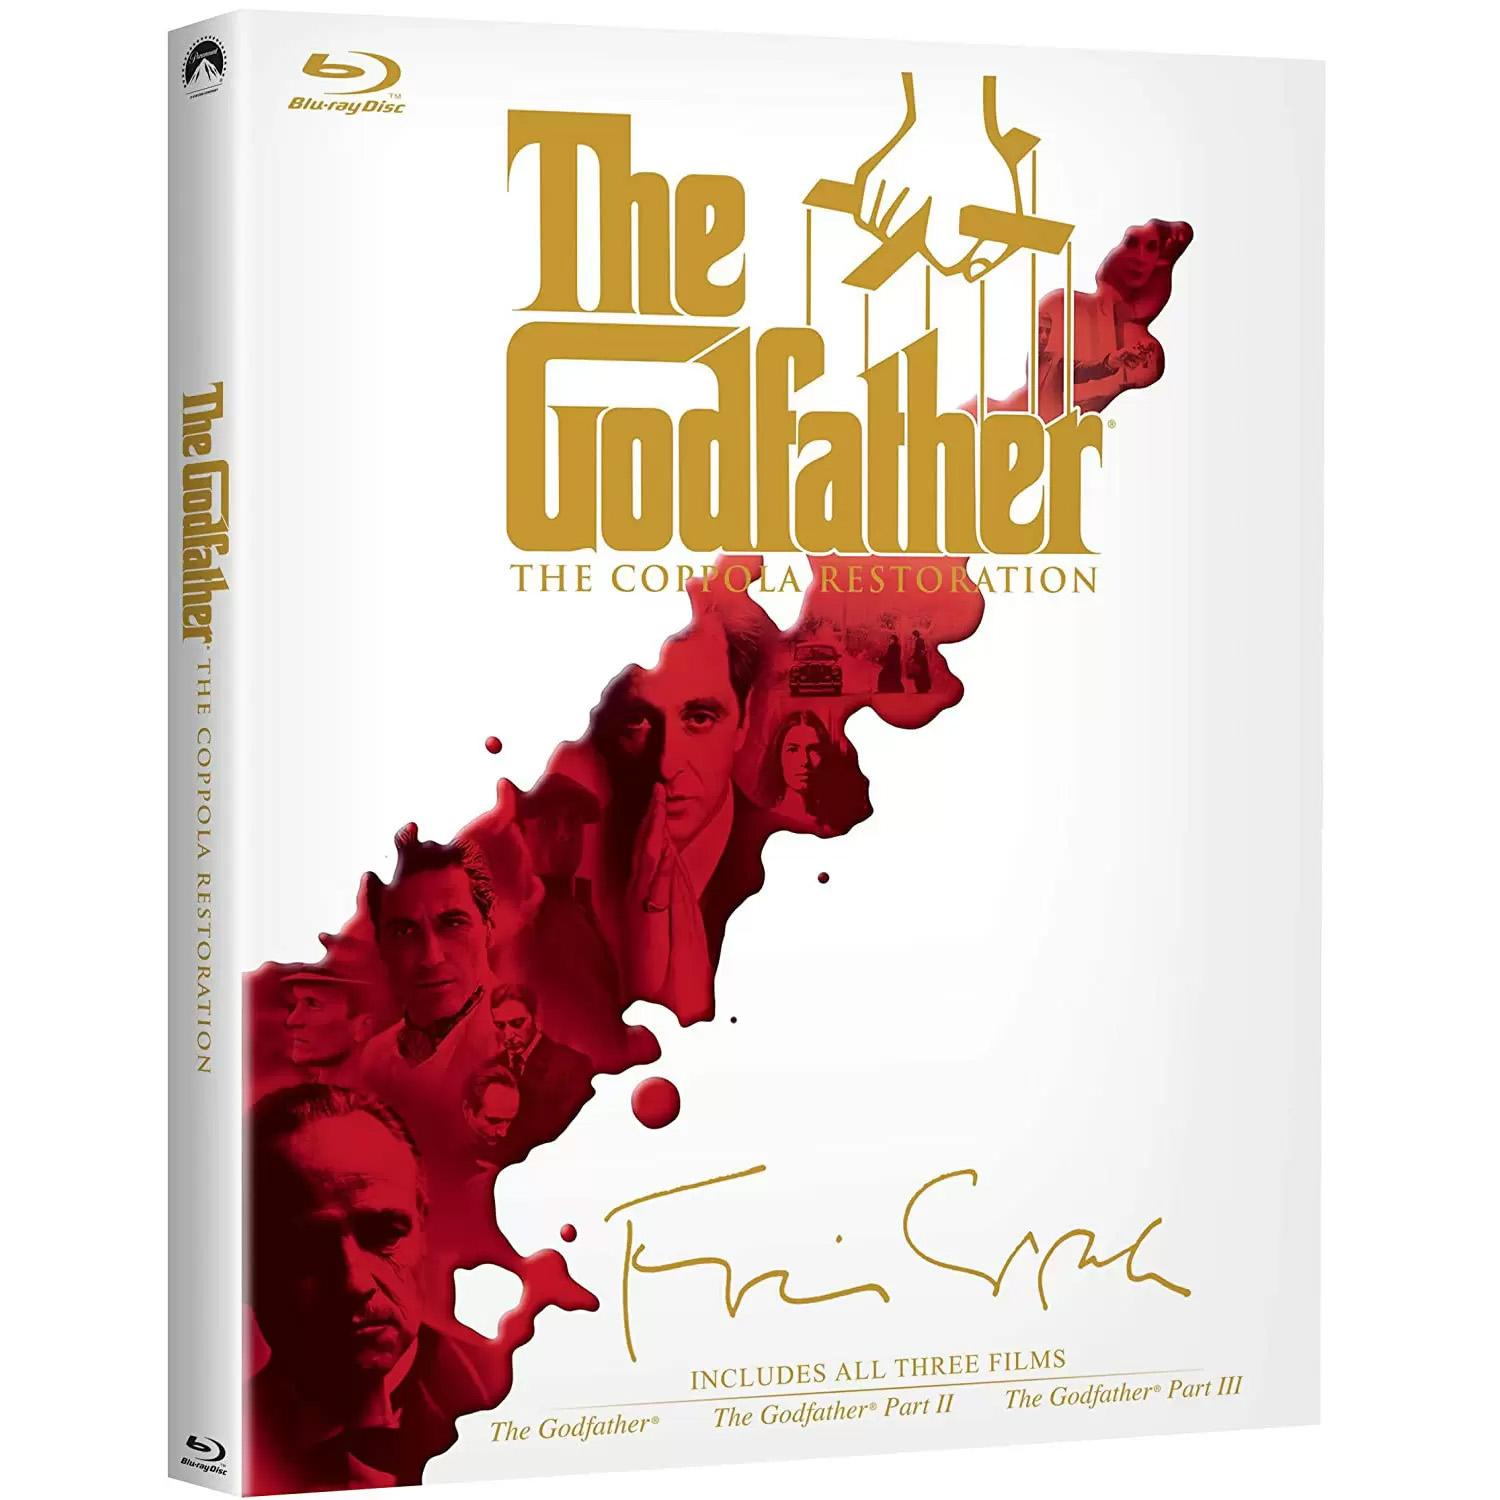 The Godfather Coppola Restoration Collection Blu-ray for $9.99